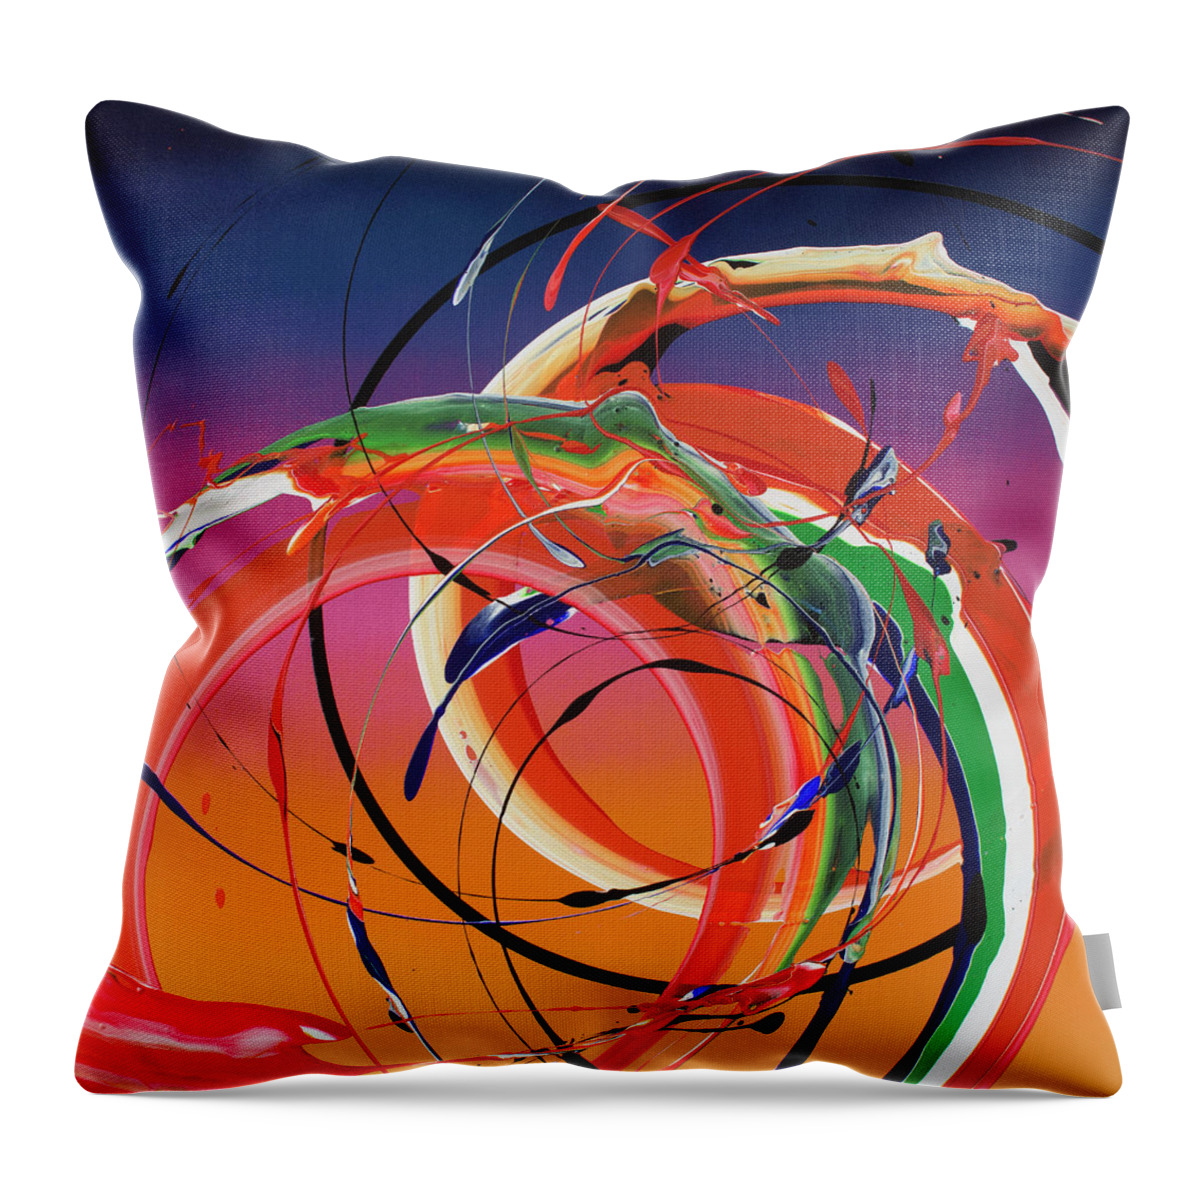 Abstract Painting Throw Pillow featuring the painting Orange and Blue by Richard Day